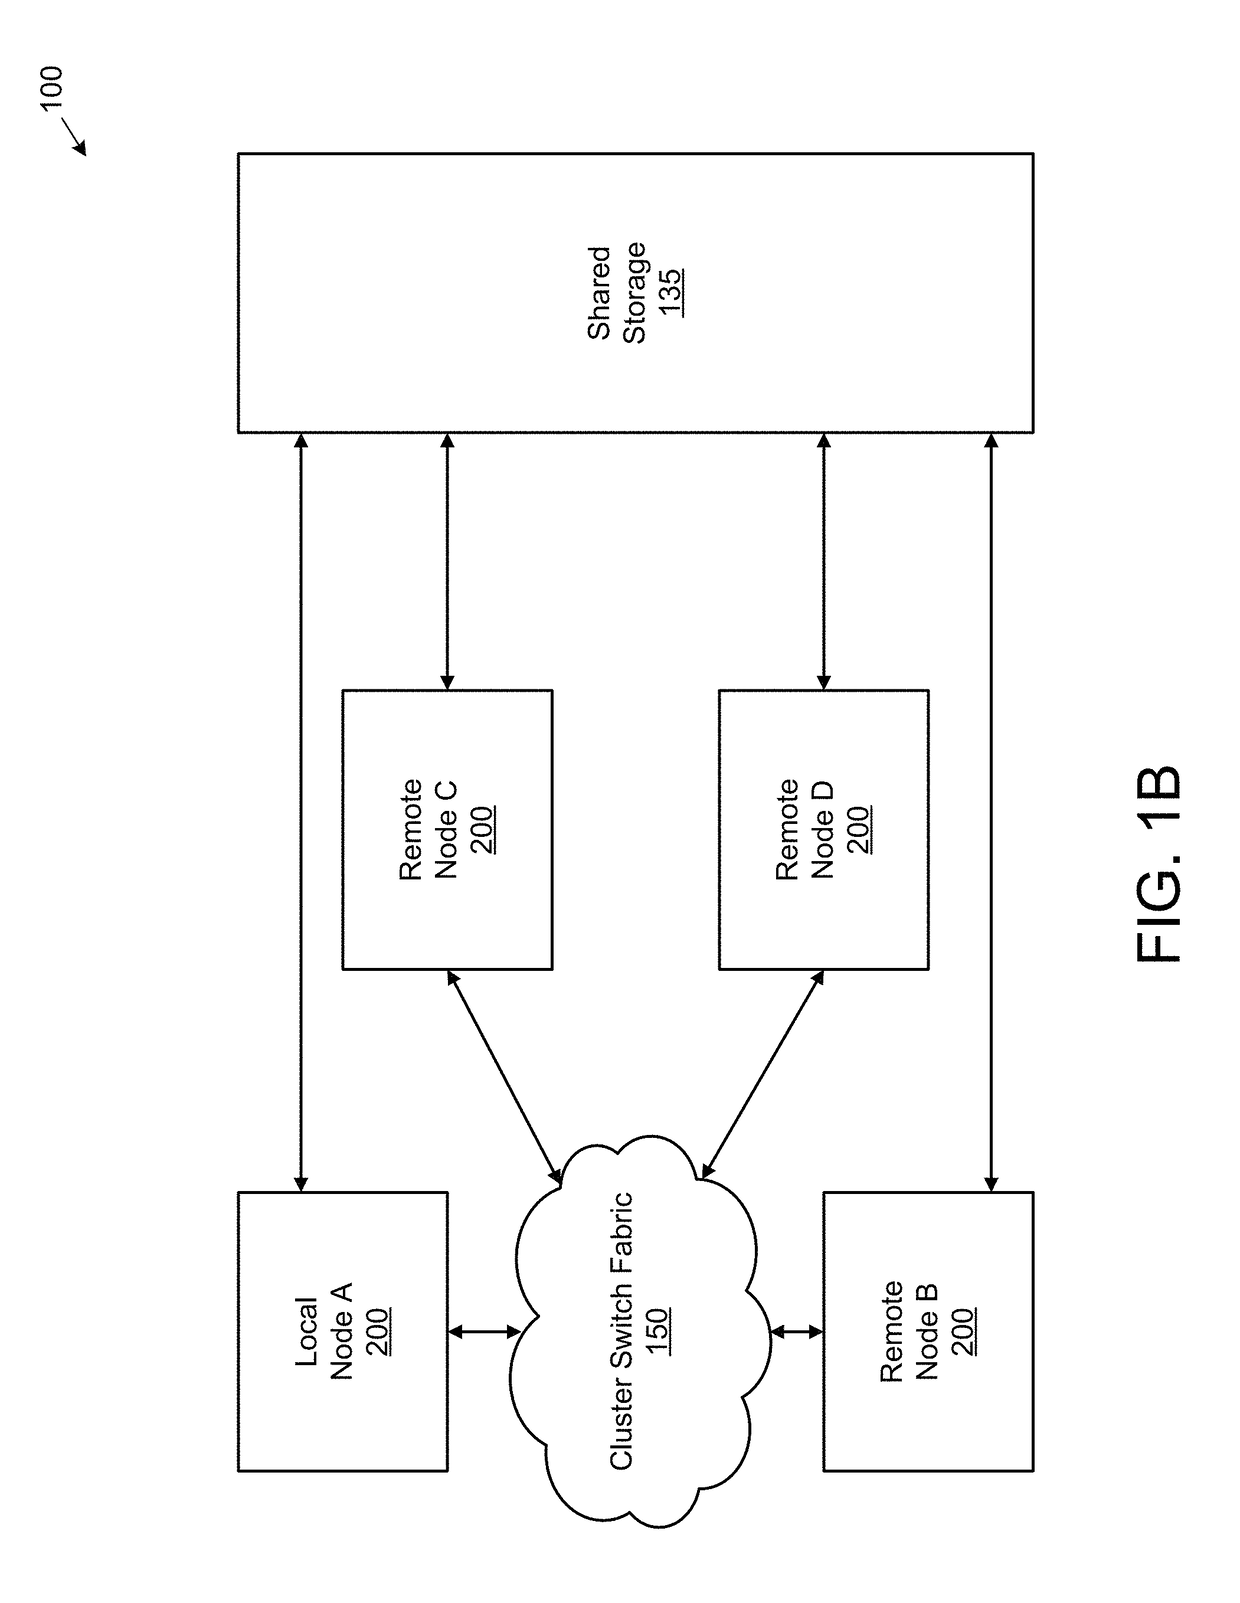 Coalescing metadata for mirroring to a remote storage node in a cluster storage system